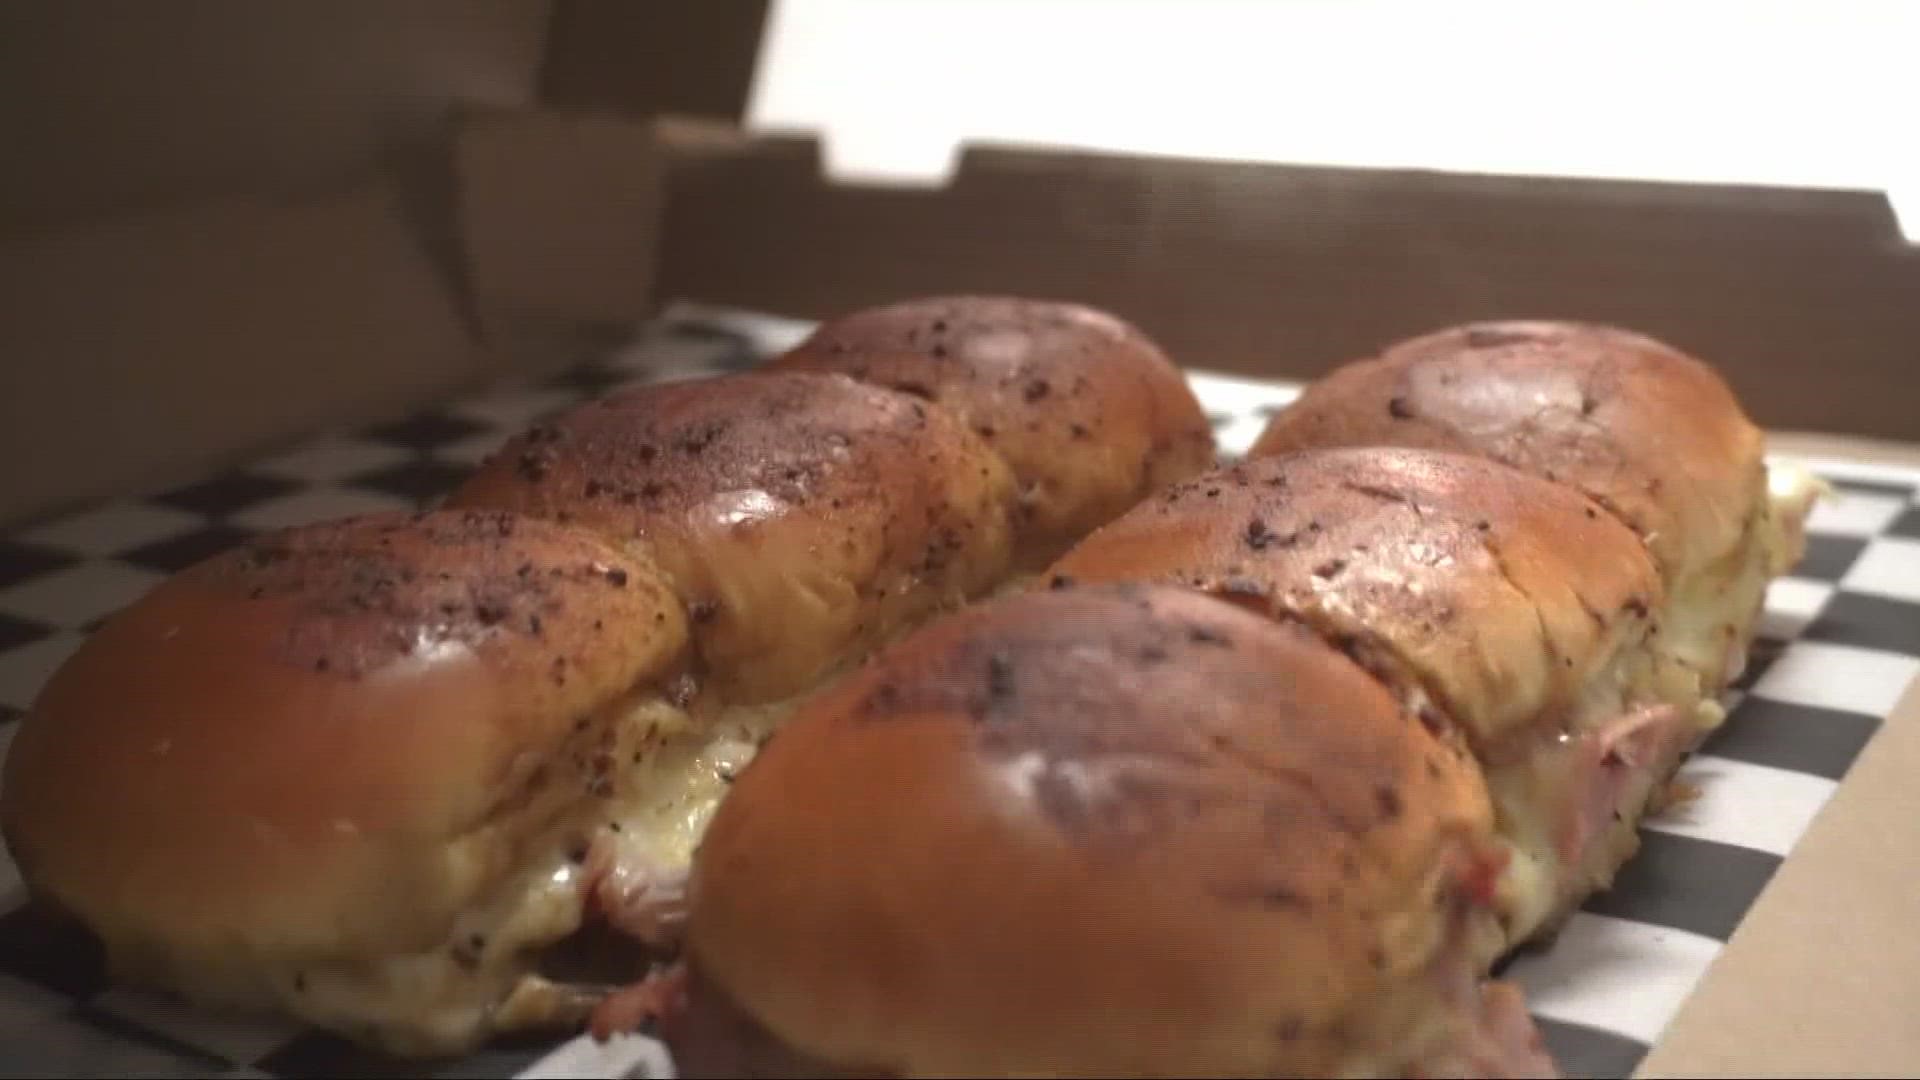 3News' Austin Love teamed up with Chef Rocco Whalen for a simple slider recipe